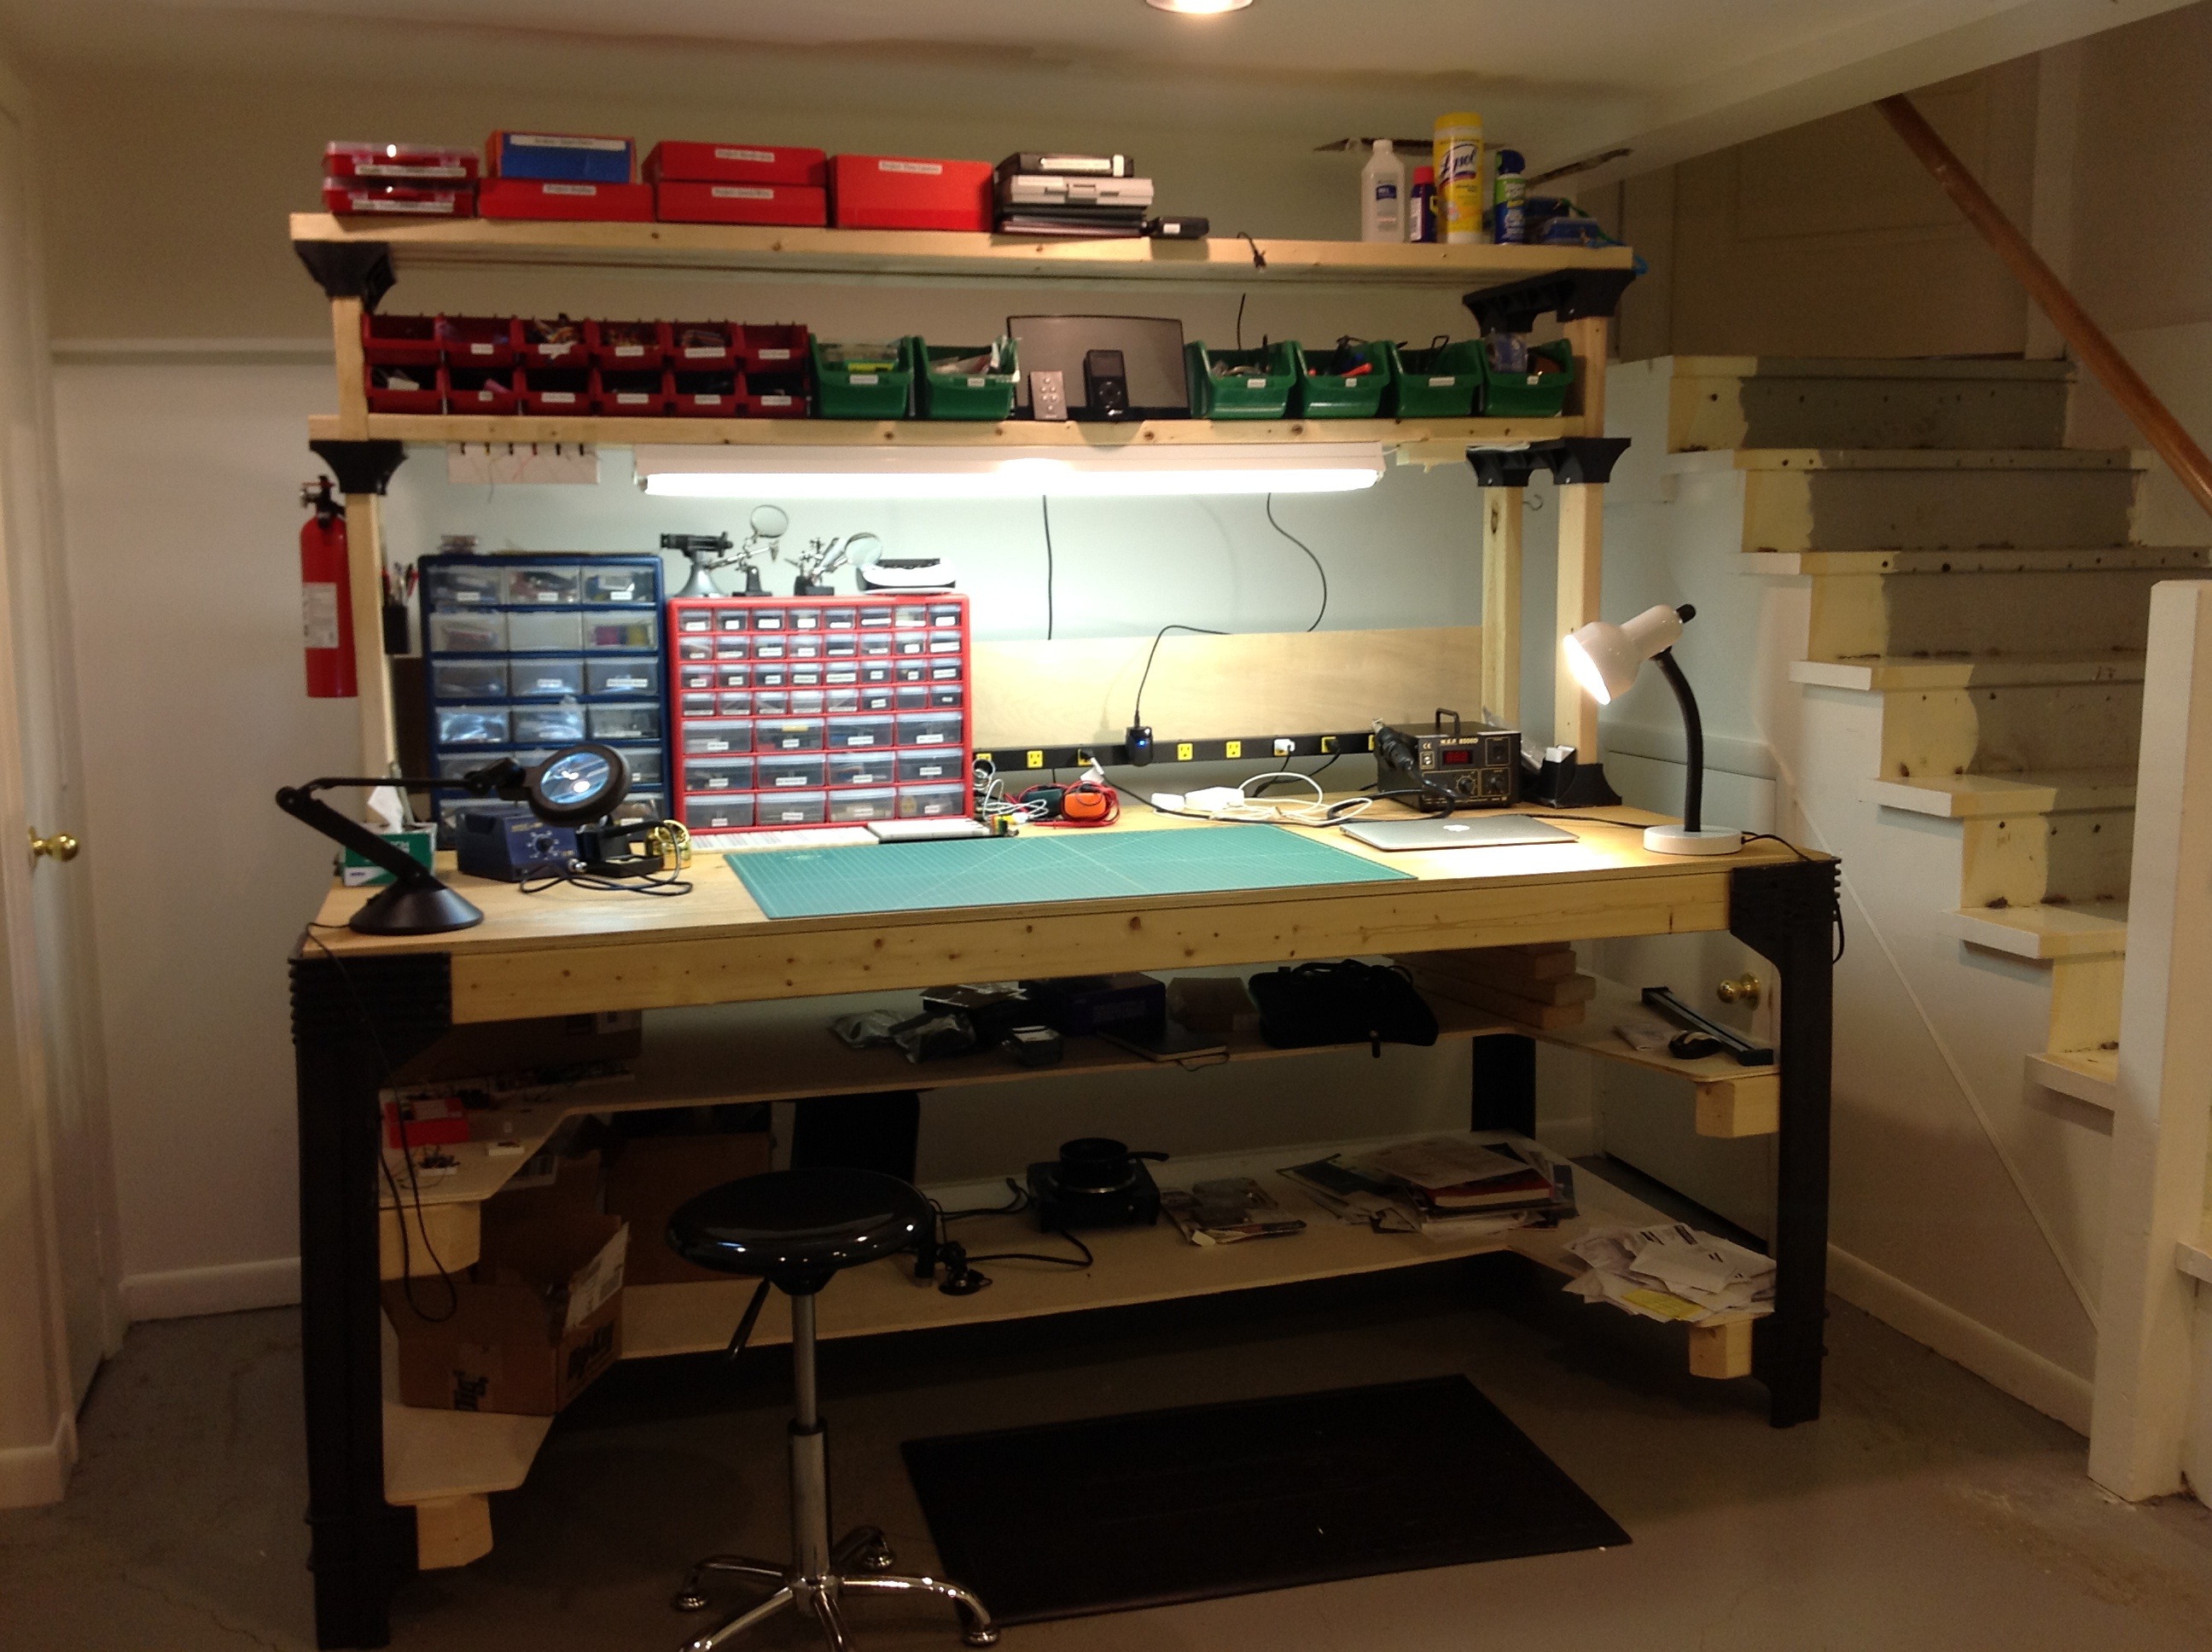 ... workbench in the basement and tips I’ve learned along the way